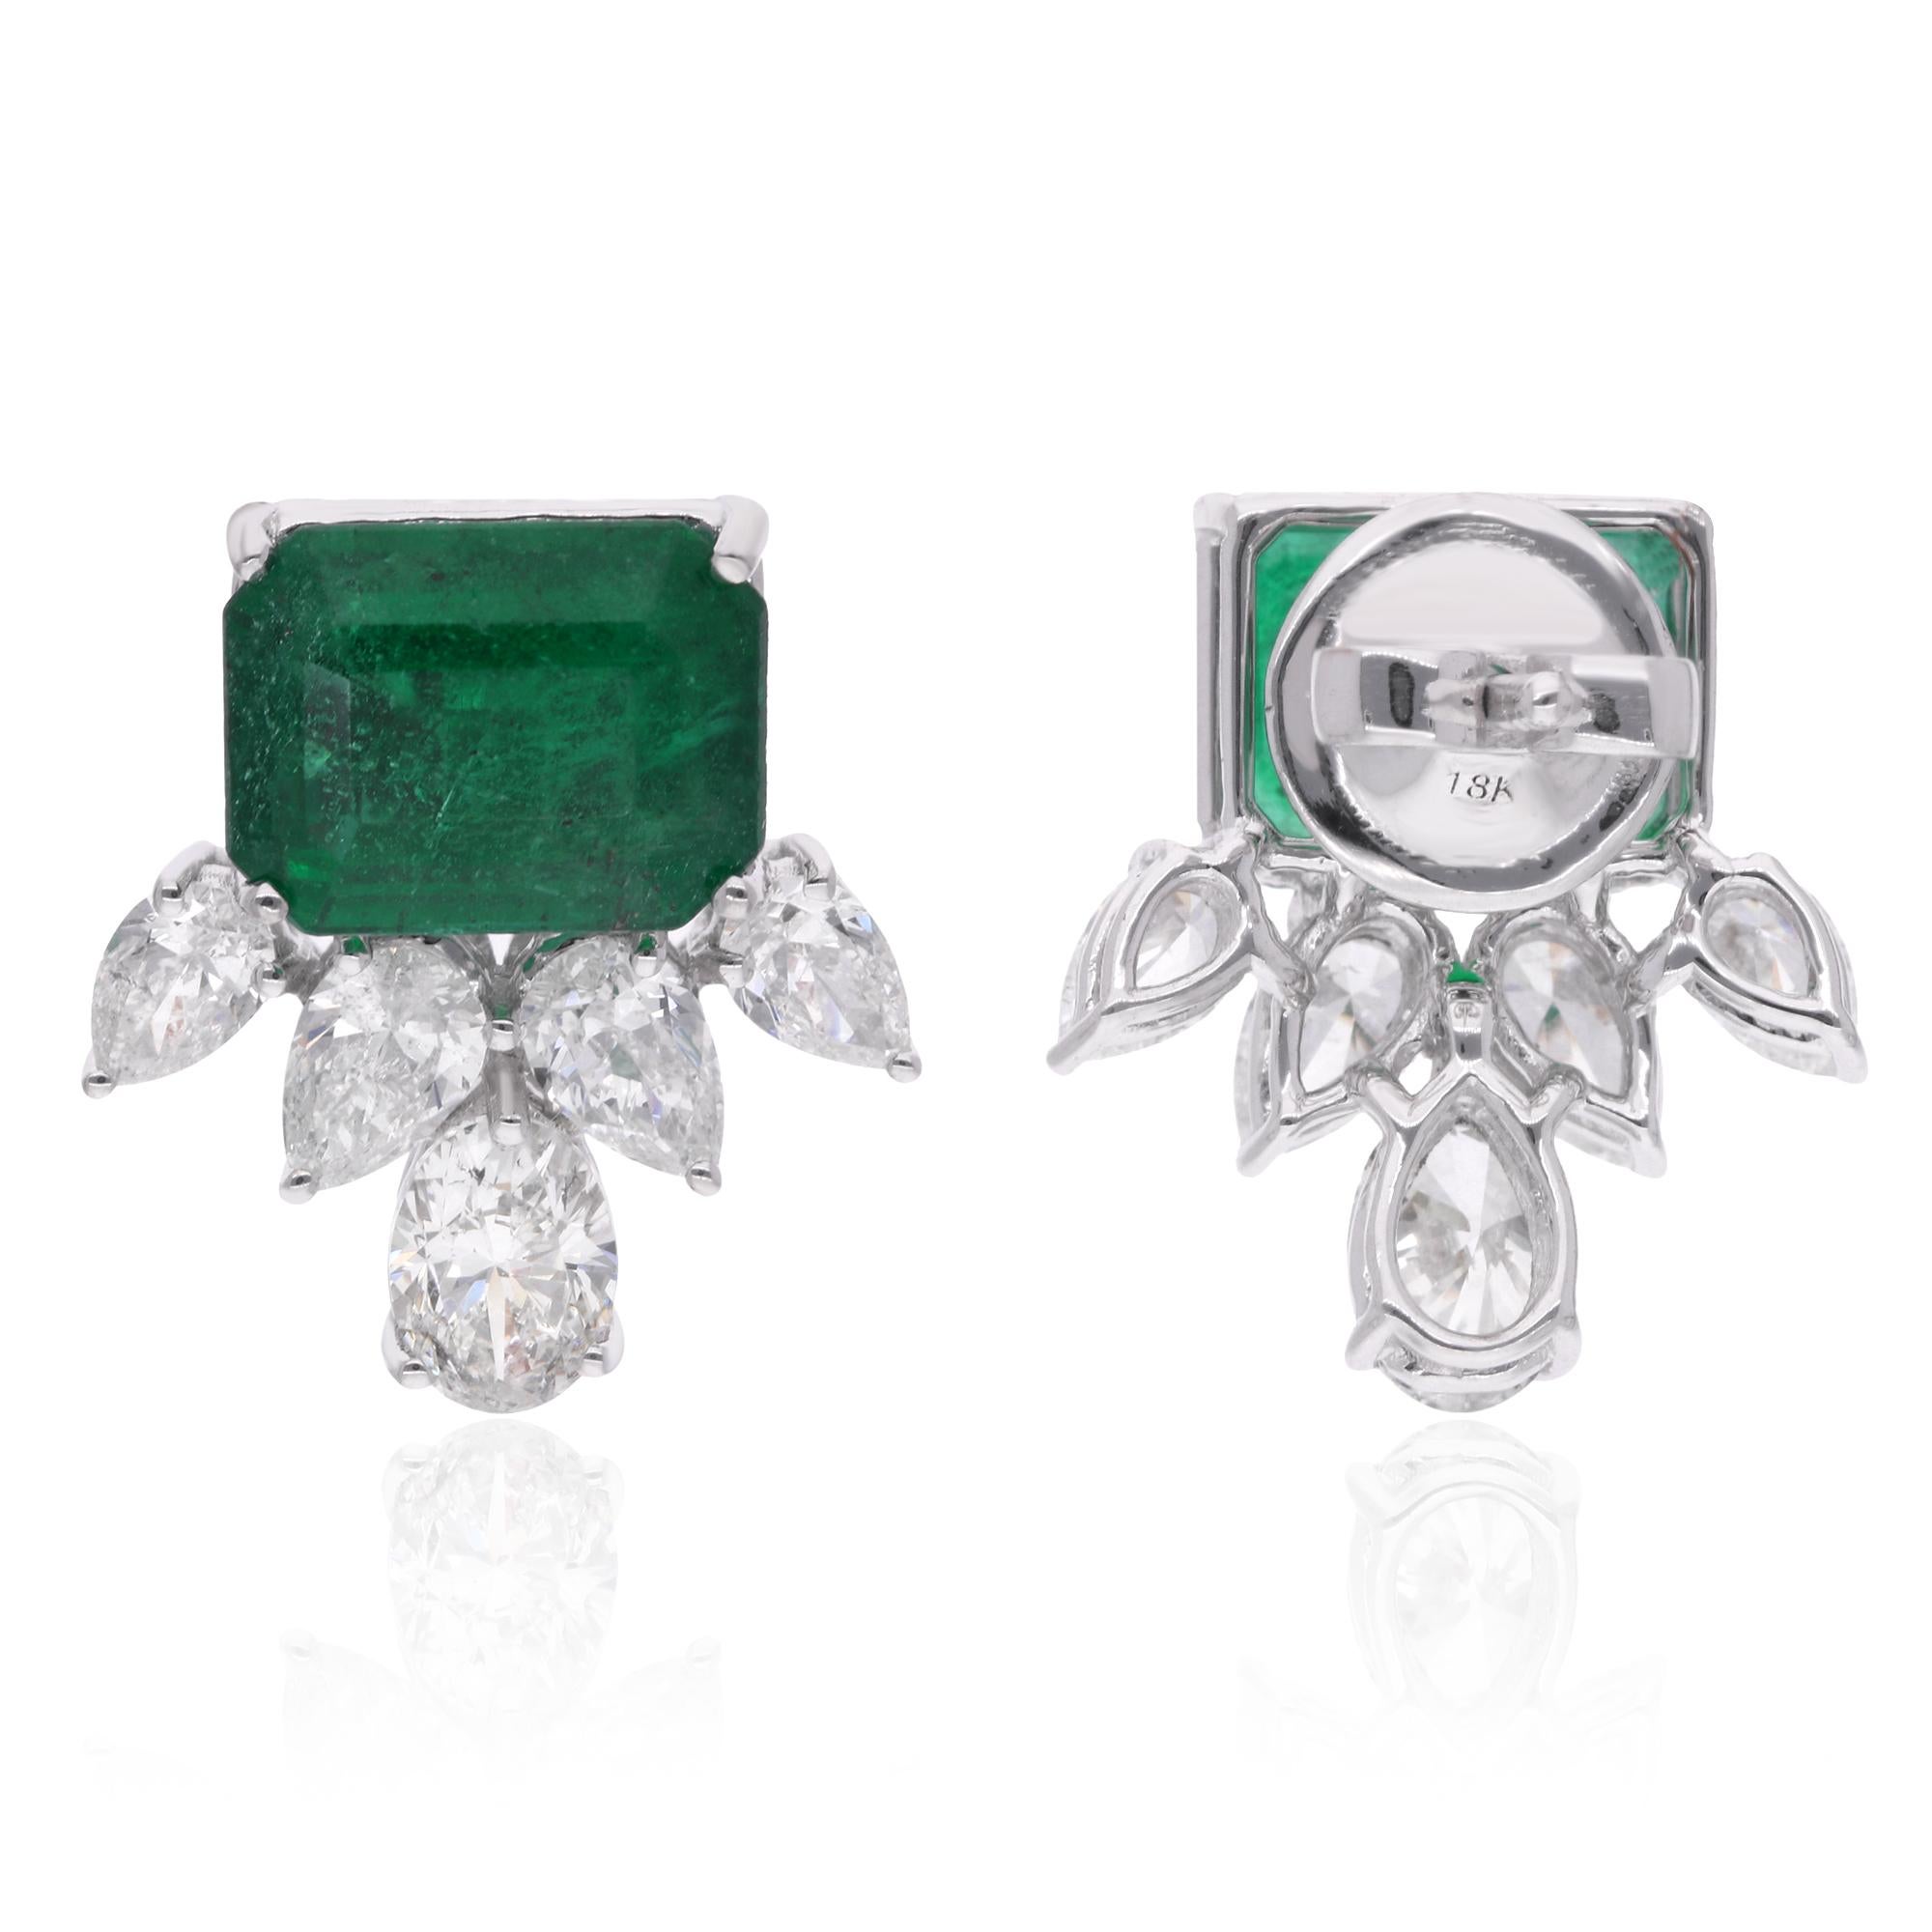 Elevate your elegance with the exquisite allure of these Zambian Emerald Gemstone Stud Earrings, adorned with pear and oval diamonds and meticulously crafted in 18 karat white gold. Each earring features a captivating Zambian emerald gemstone,